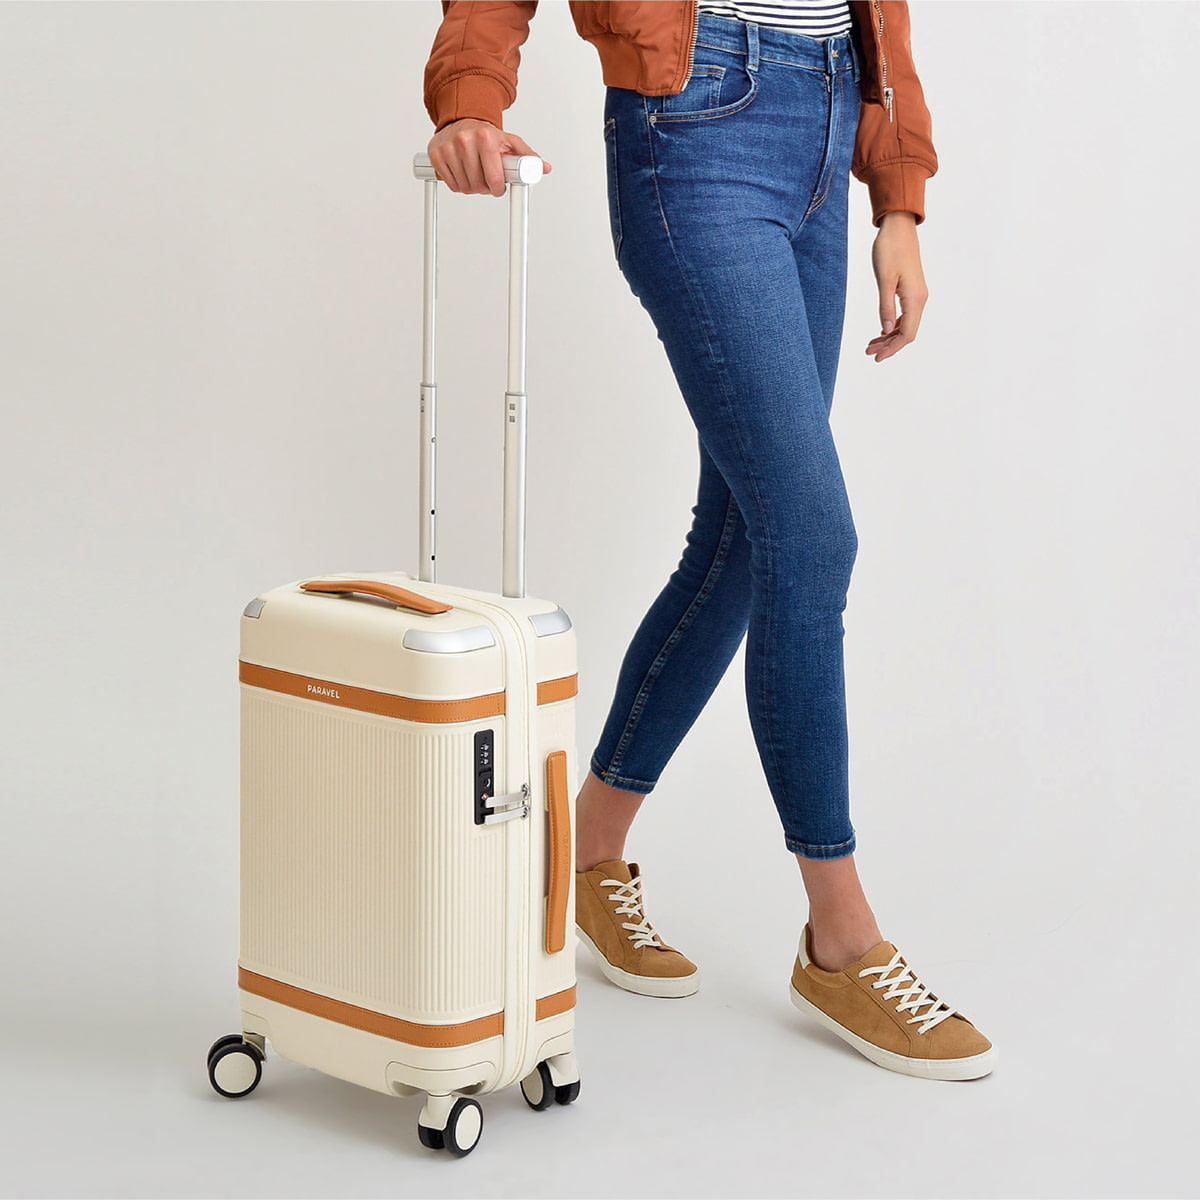 Designer carry-on luggage for women